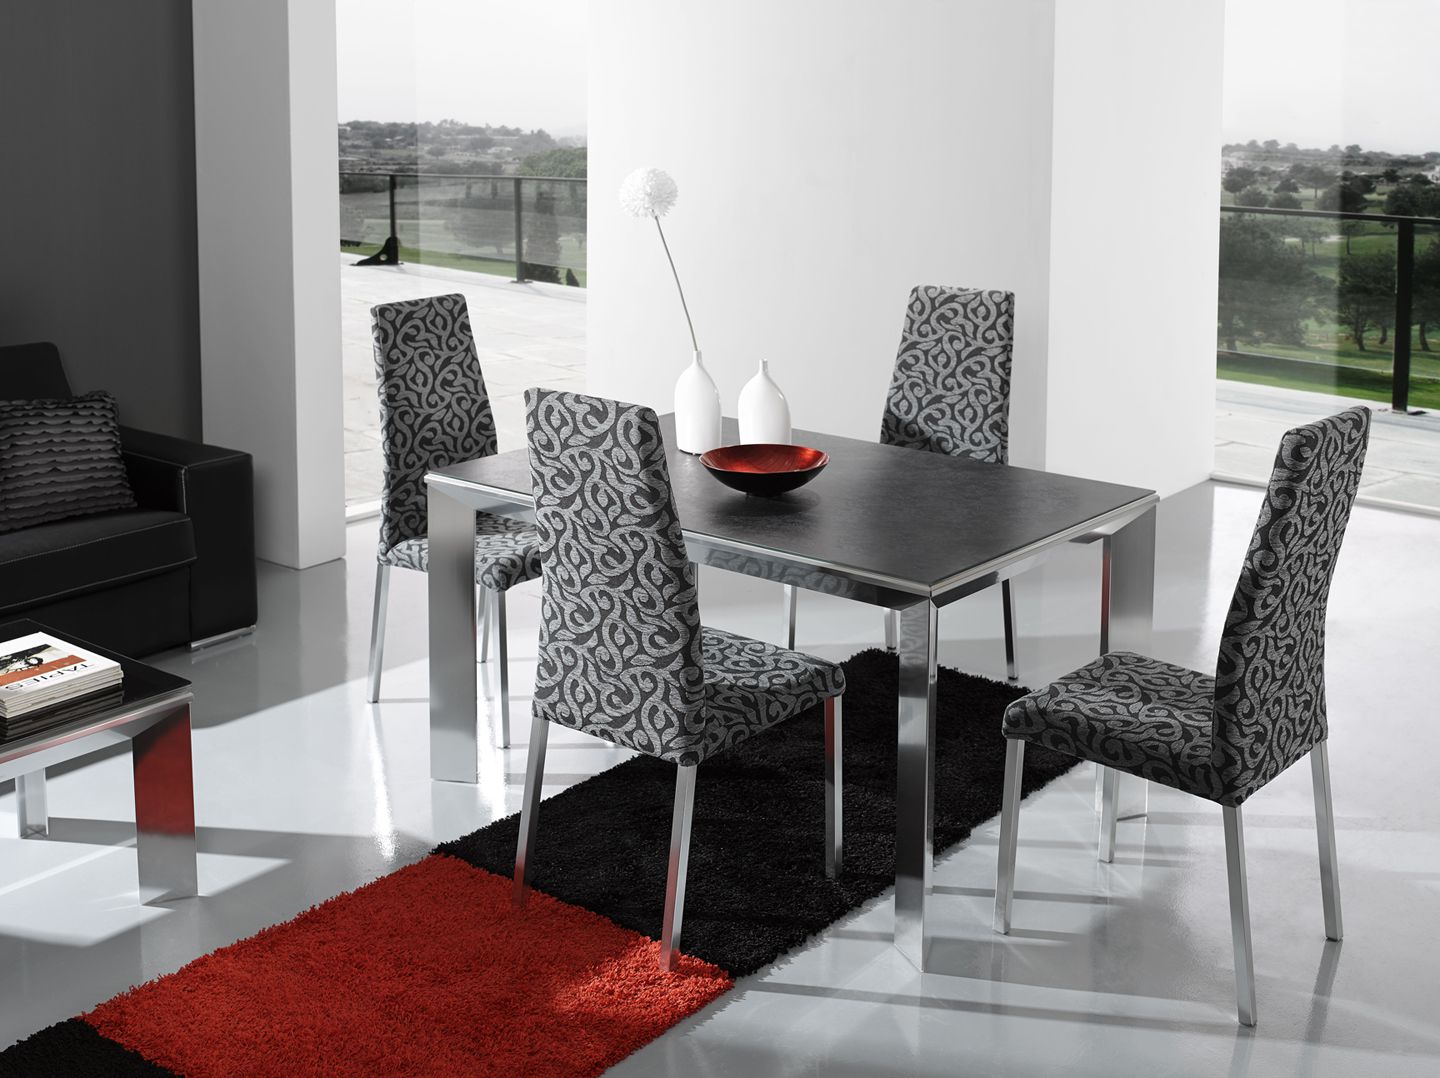 Dining Area Table Stylish Dining Area Using Grey Table And Modern Dining Room Chairs On Tile Flooring Dining Room Modern Dining Room Chairs Chosen For Stylish And Open Dining Area